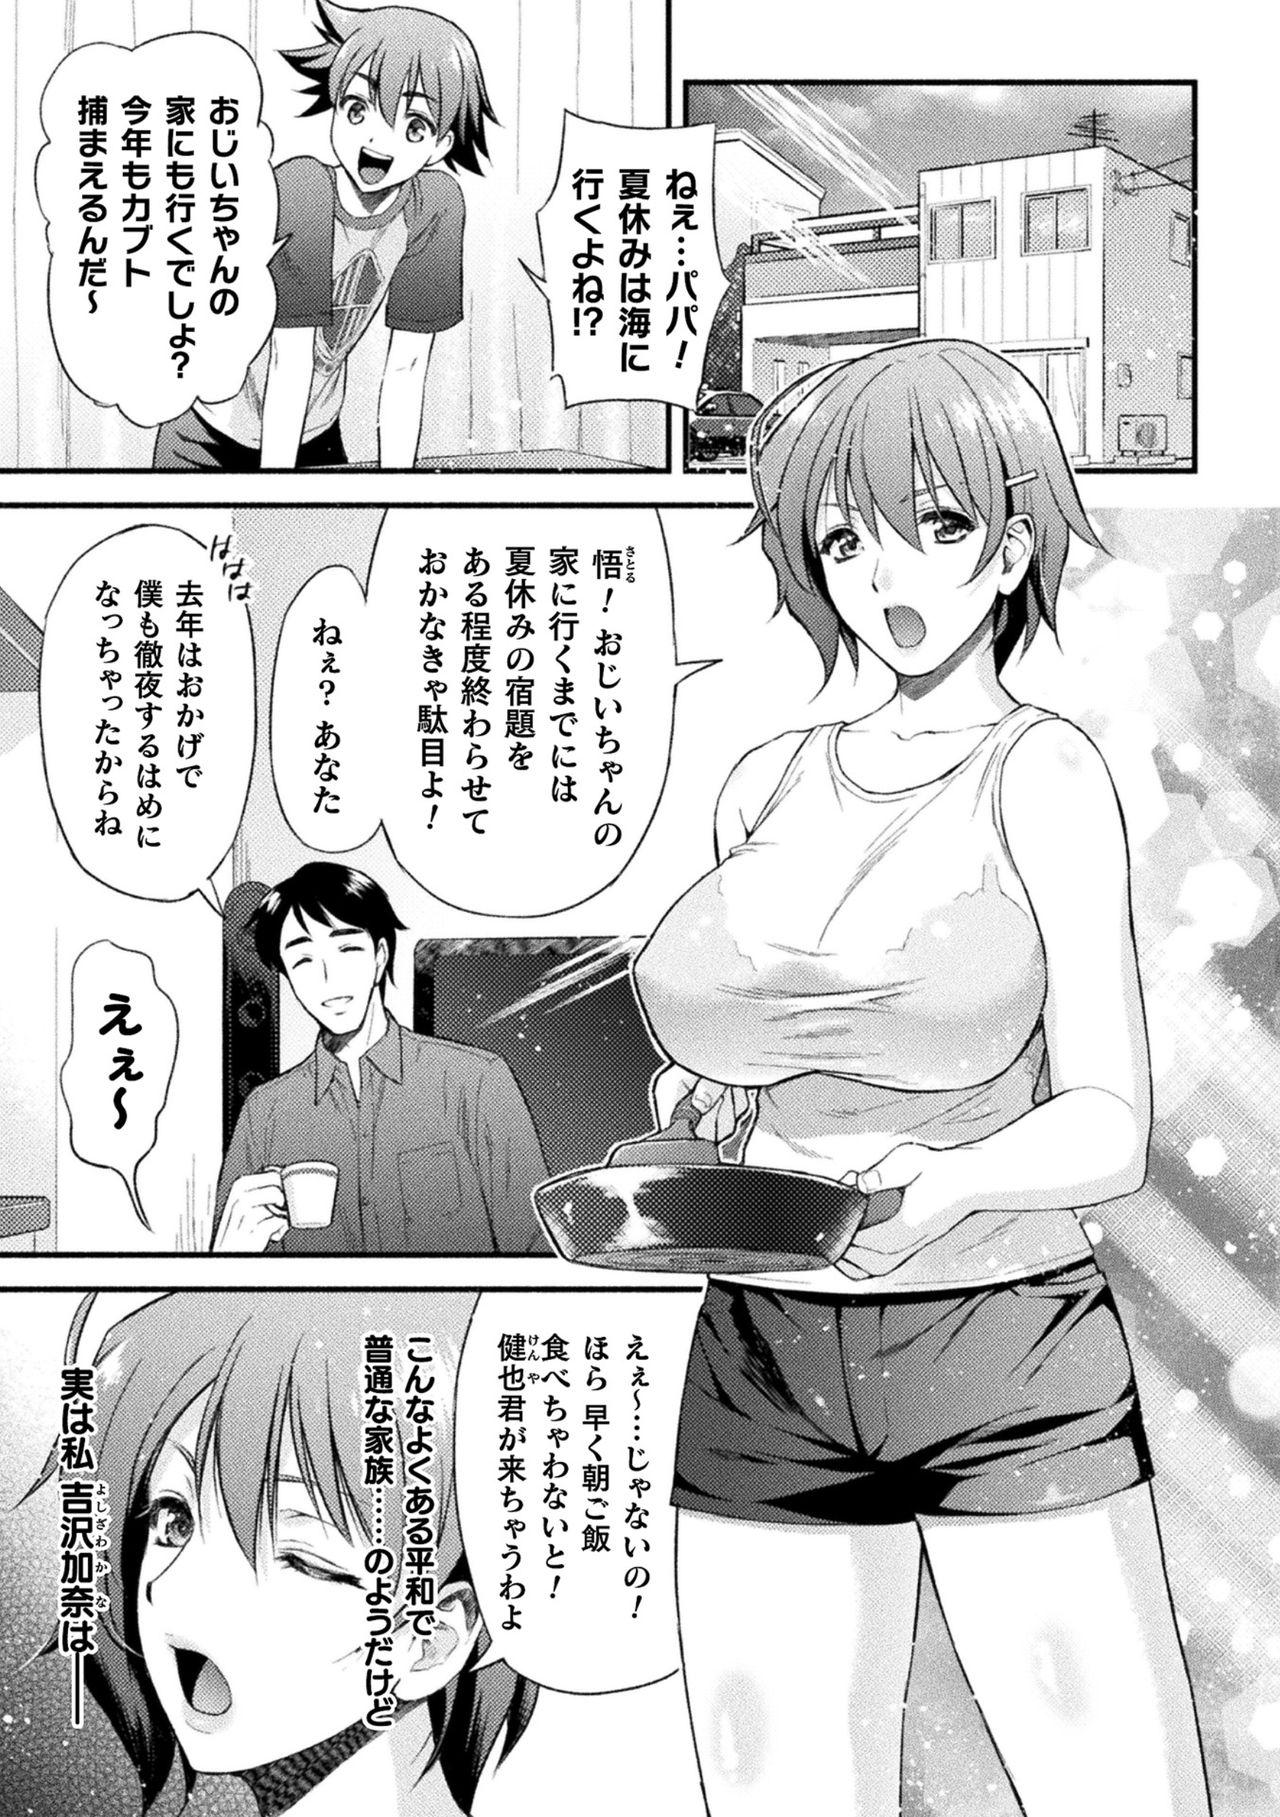 Audition Mama Wa Taimanin THE COMIC Ch. 1-9 Tanned - Page 4